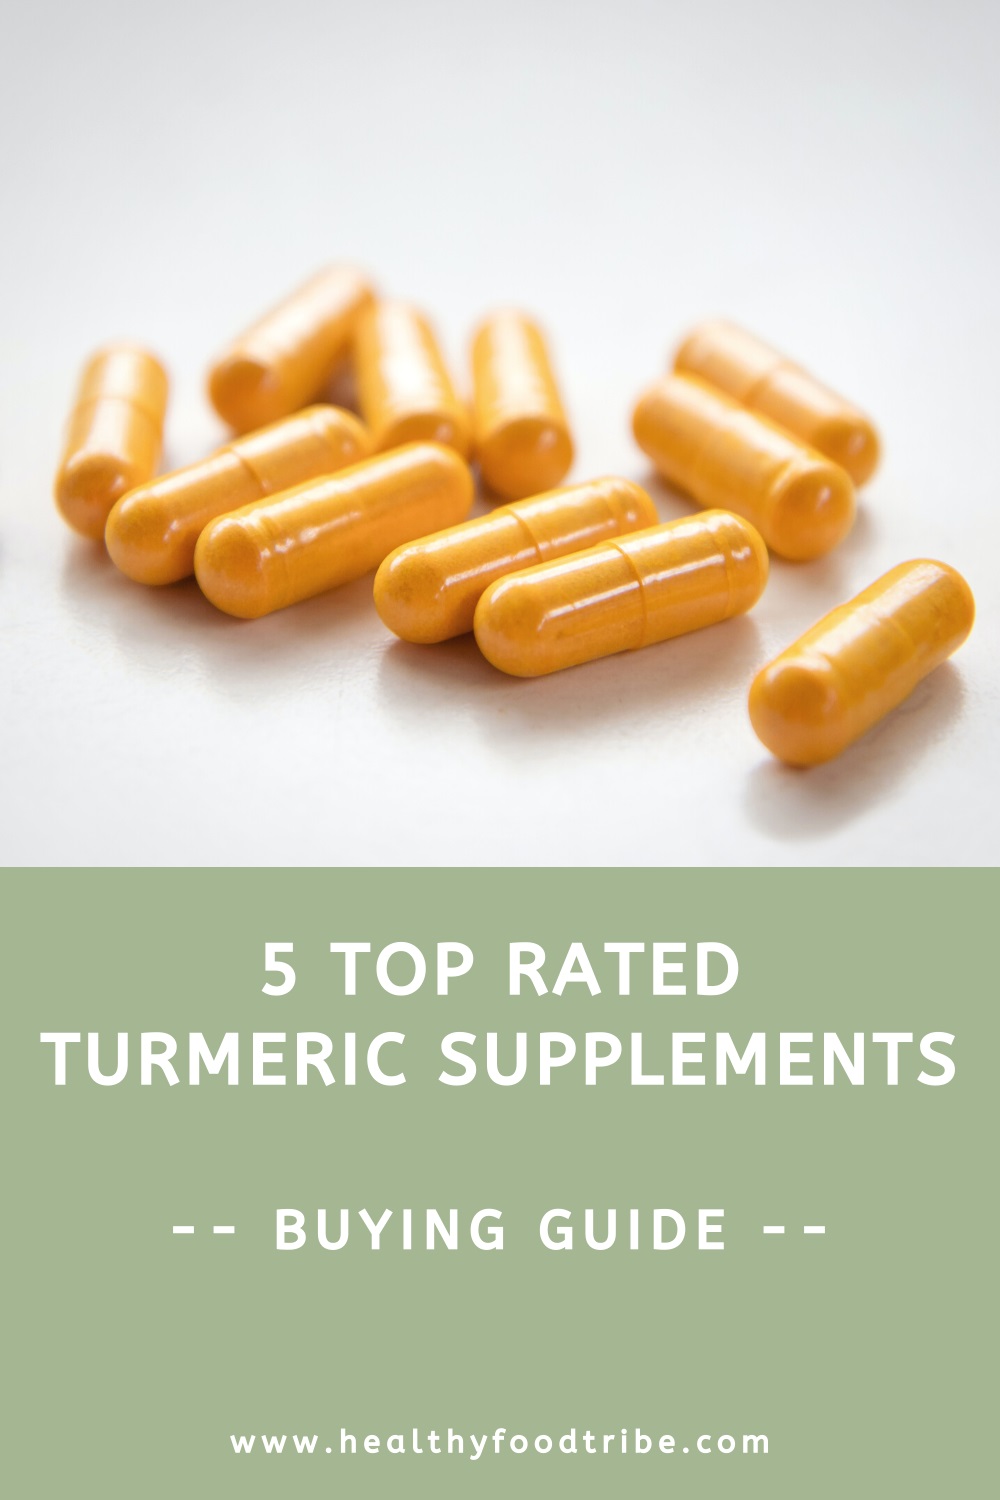 5 Top rated turmeric supplements